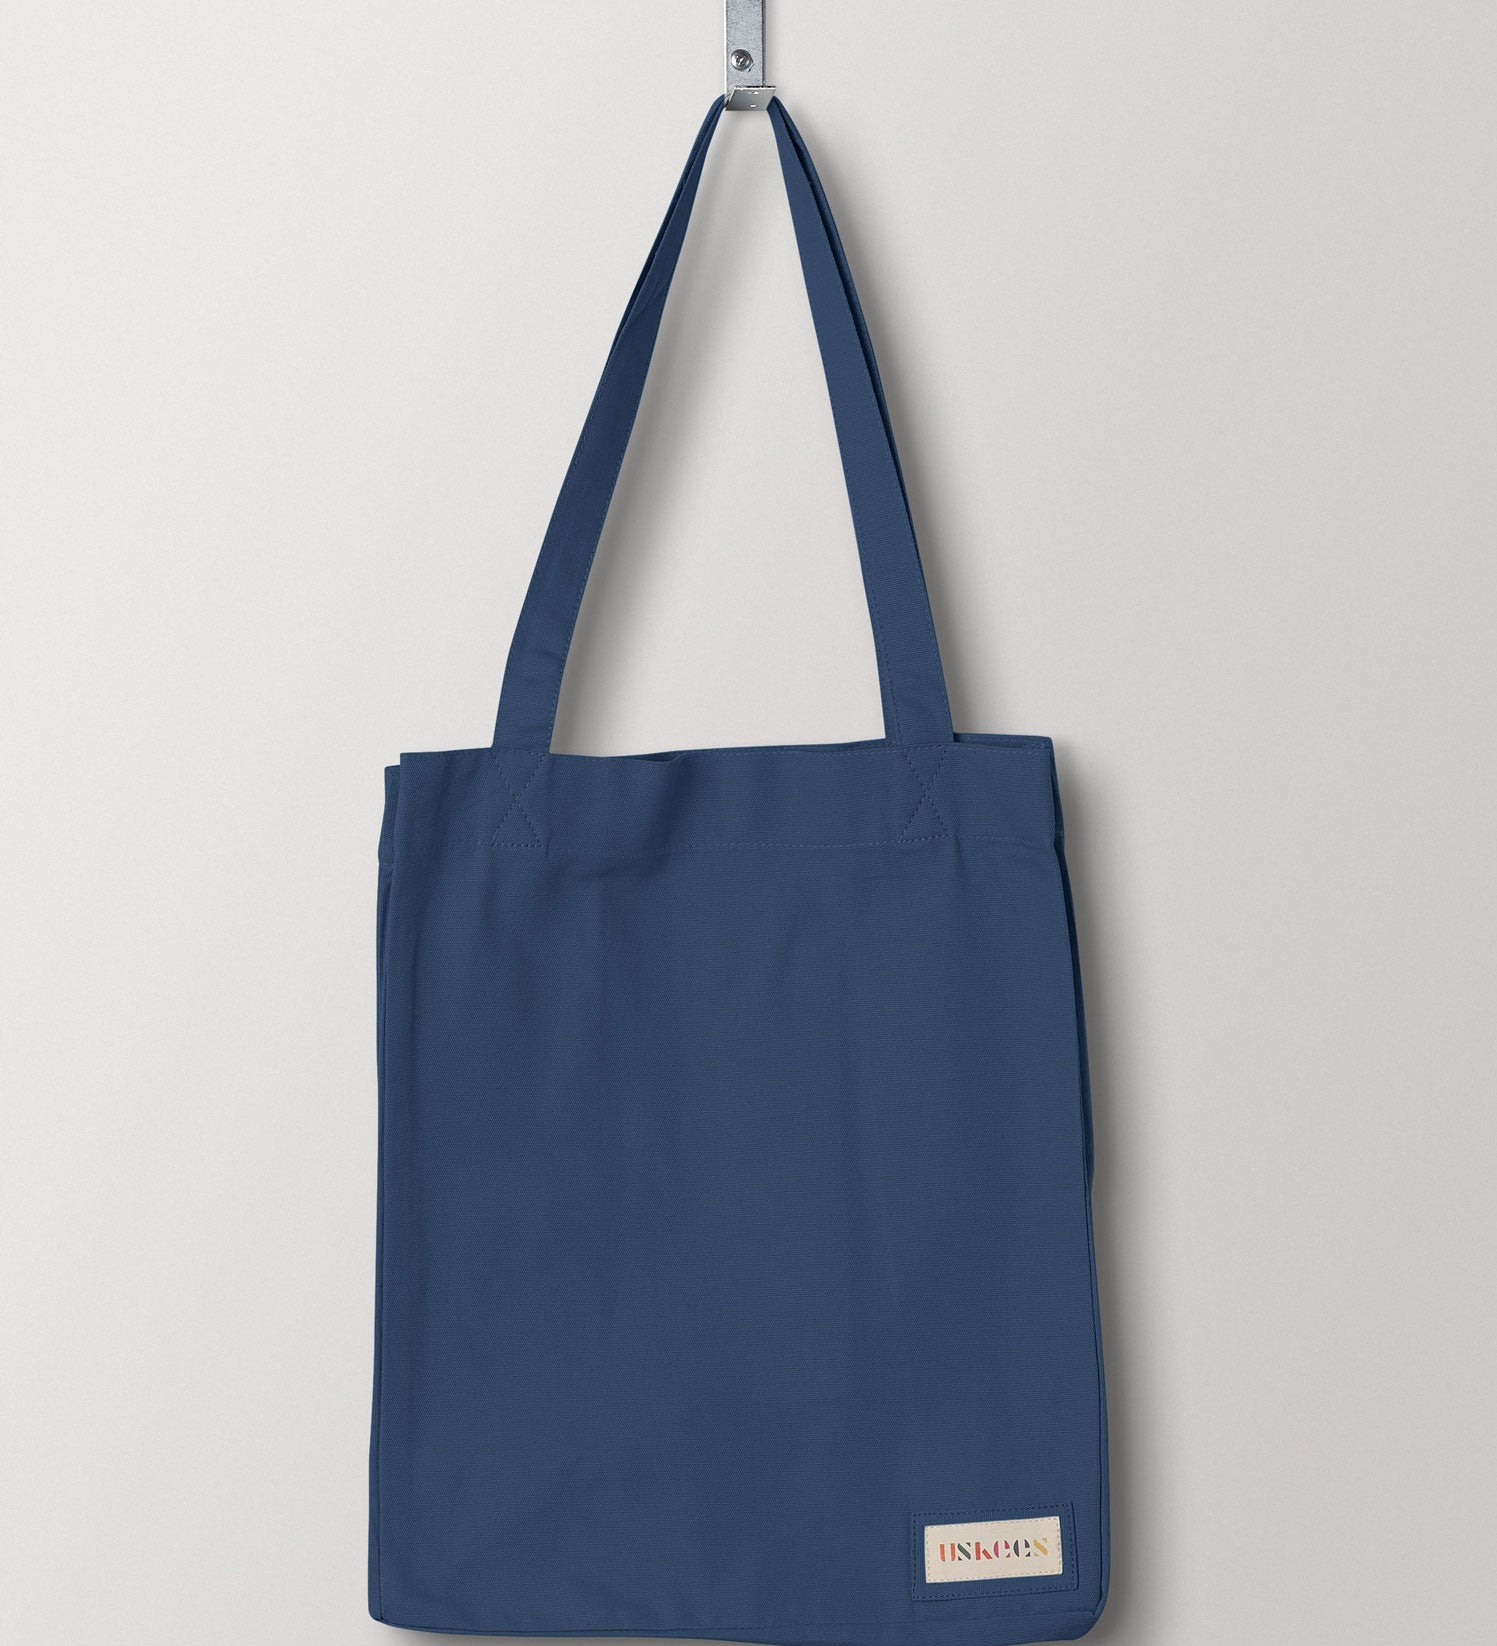 Full front hanging shot of Uskees #4002 small peacock-blue tote bag, showing double handles and Uskees woven logo.